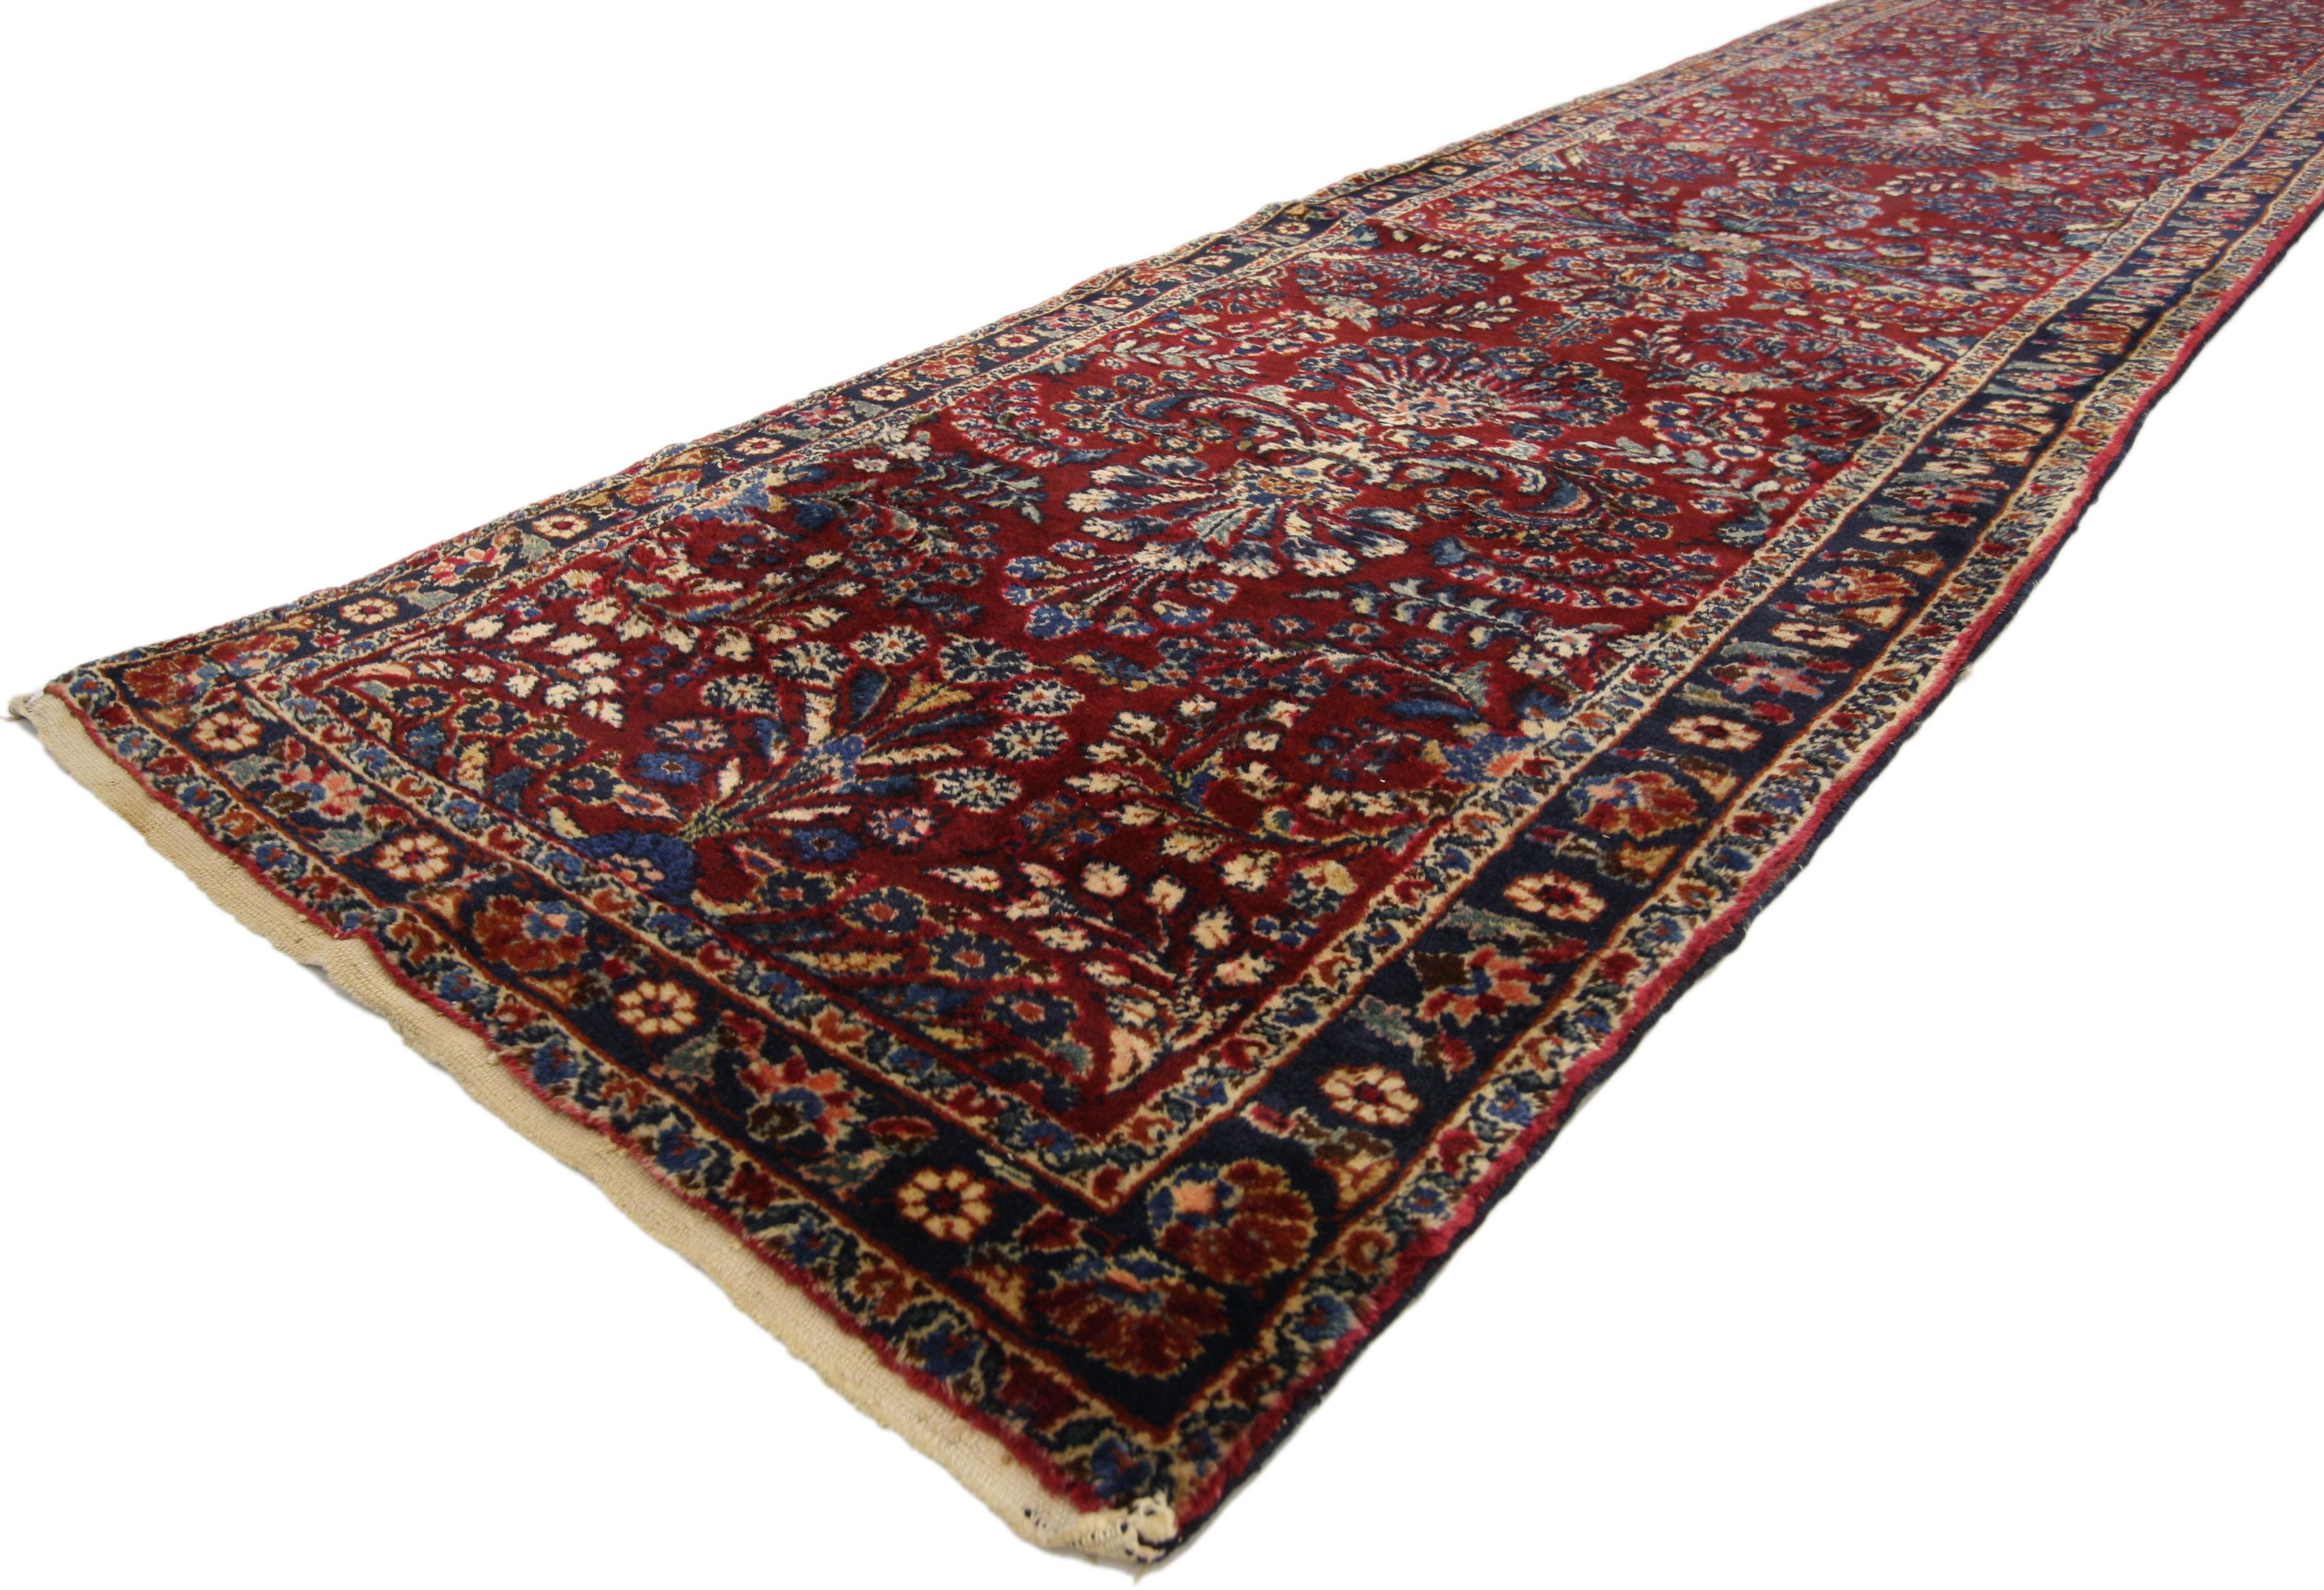 77169 Antique Persian Lilihan Runner with Old World Regency Style, Extra Long Hallway Runner 02’09 x 28’11.. This hand-knotted wool antique Persian Lilihan carpet runner features a pattern of bursting floral sprays densely populating the field